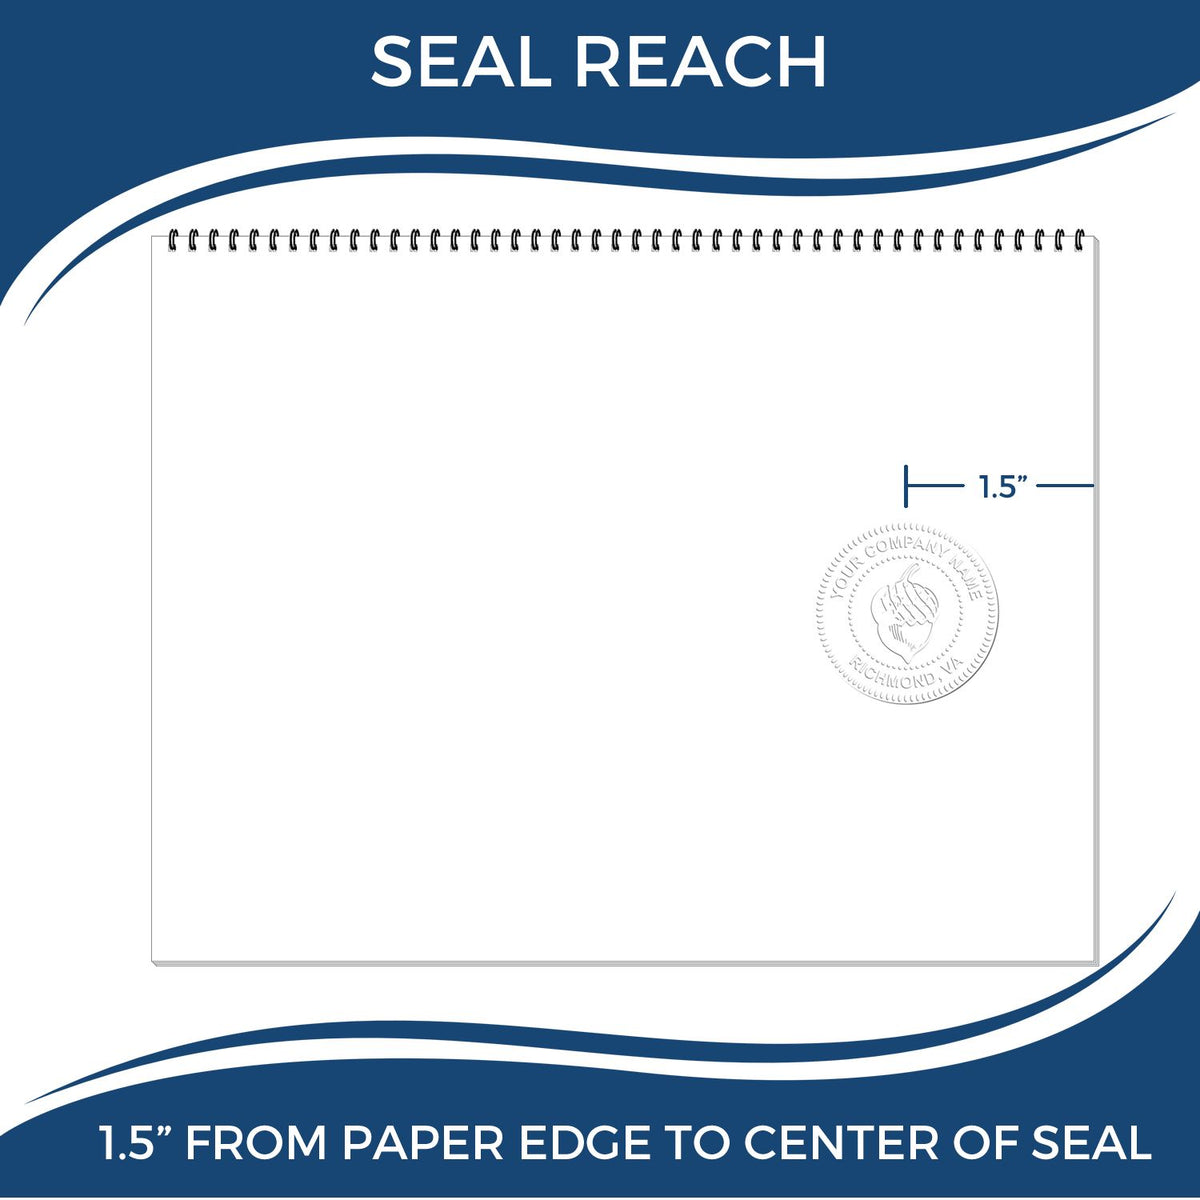 An infographic showing the seal reach which is represented by a ruler and a miniature seal image of the Gift Iowa Land Surveyor Seal